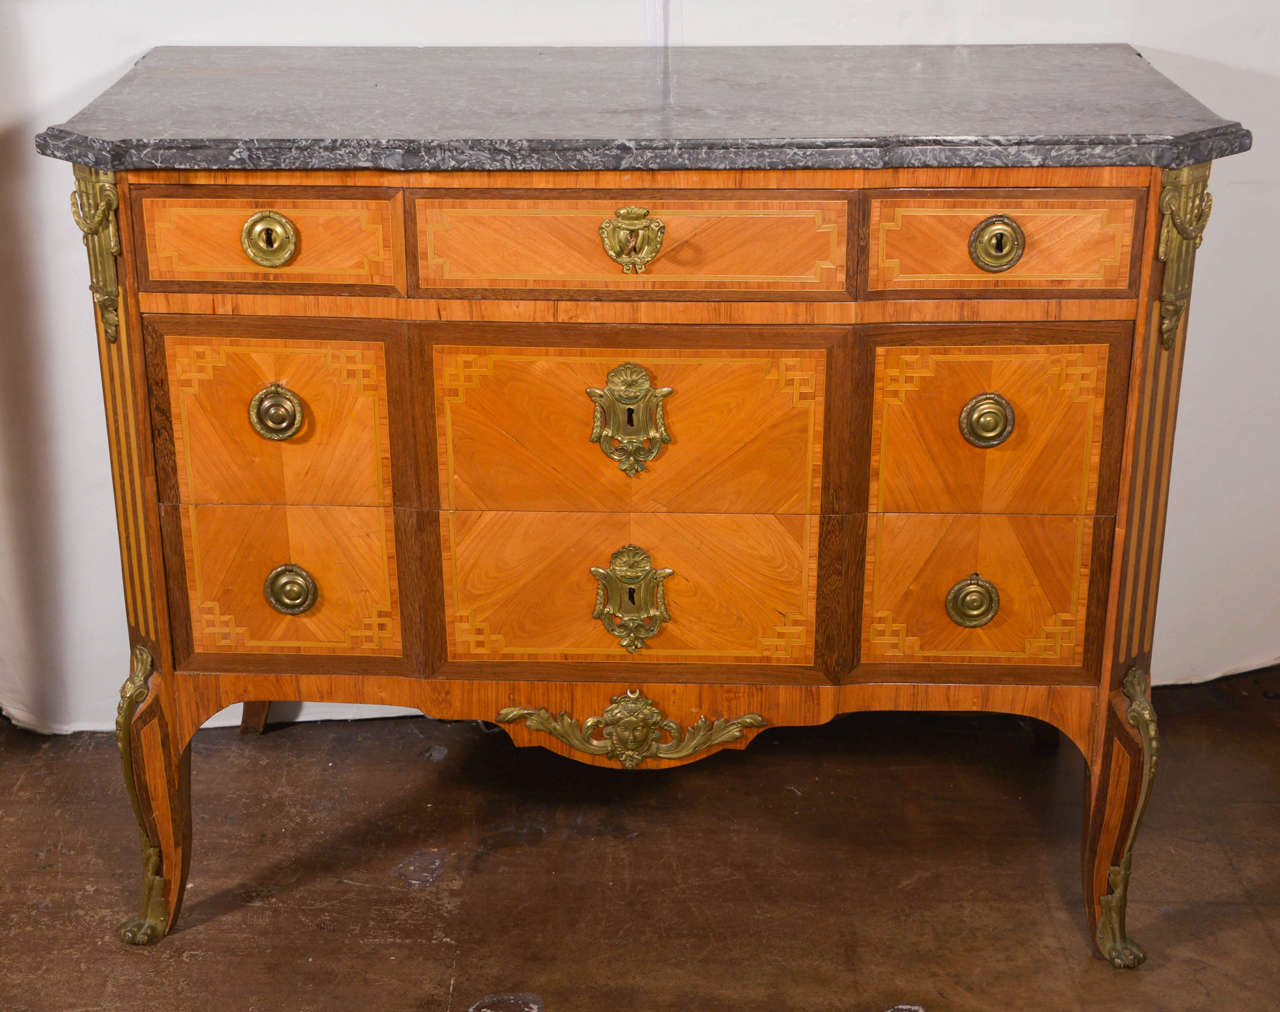 Transitional Louis XV-XVI period marquetry commode with grey marble top. Three upper drawers over two lower drawers. Ormolu mounts. Circa 1770. This is not a set of two.